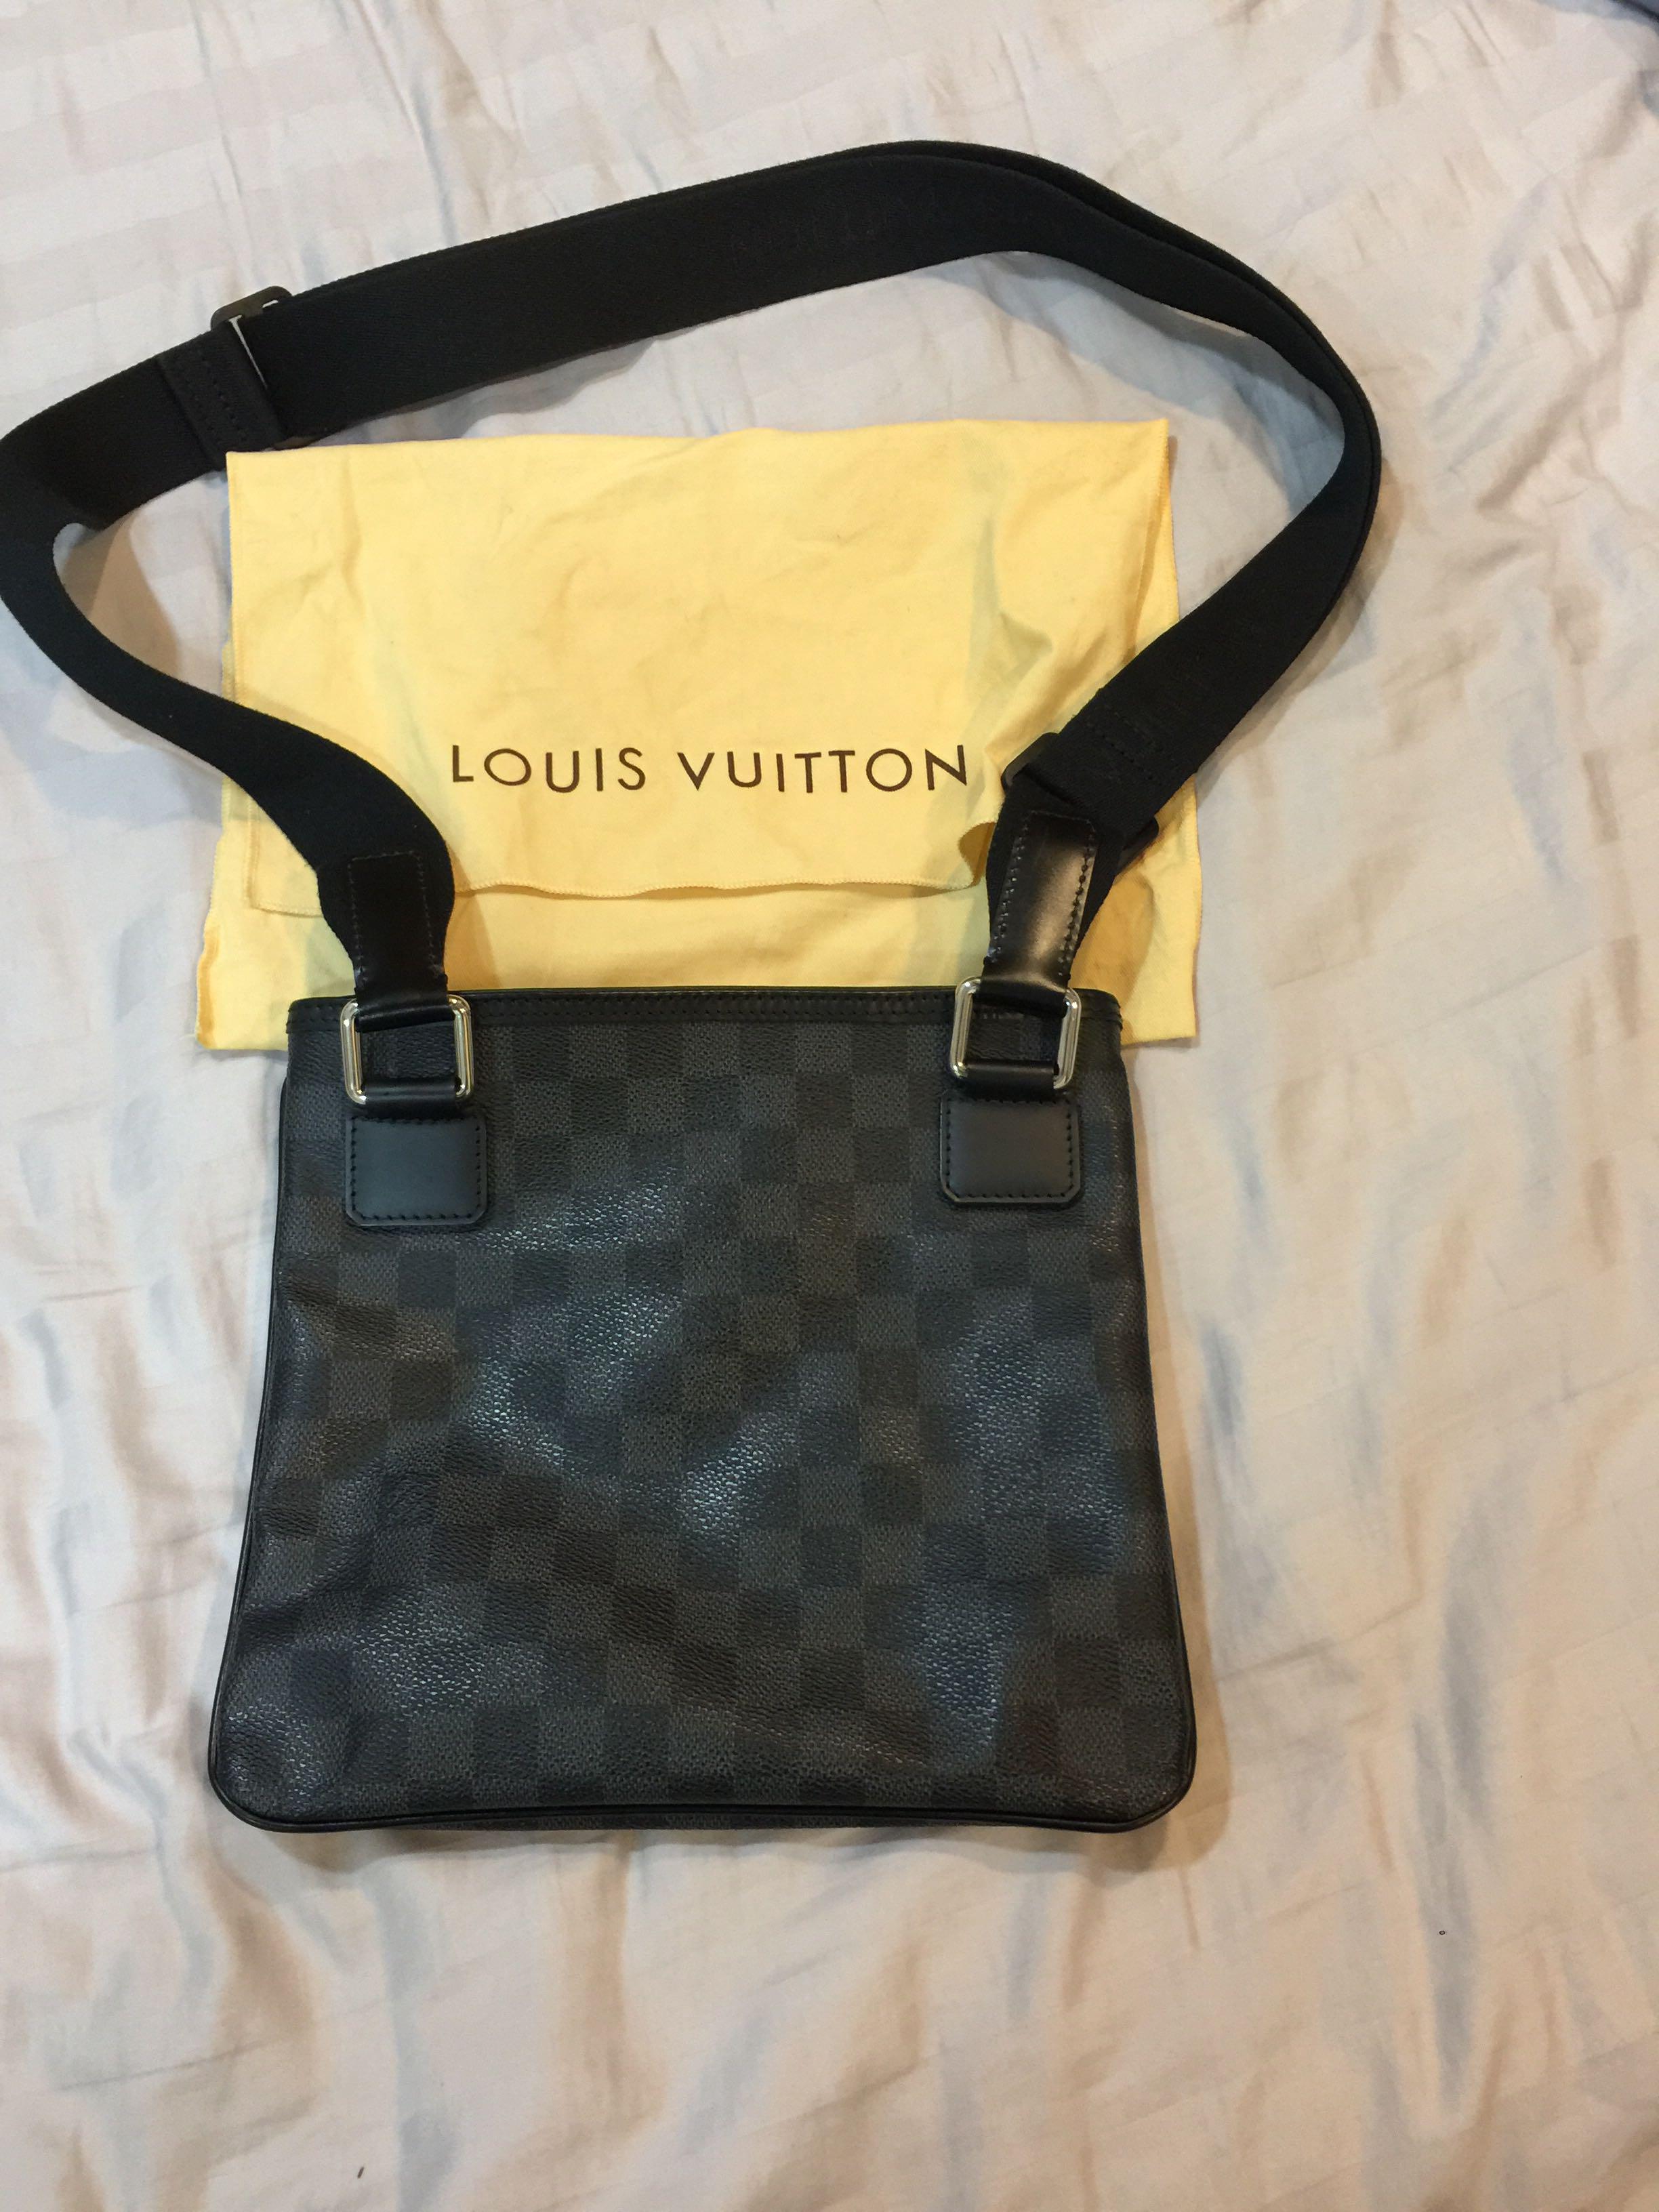 How To Wear Lv Sling Bag | Paul Smith